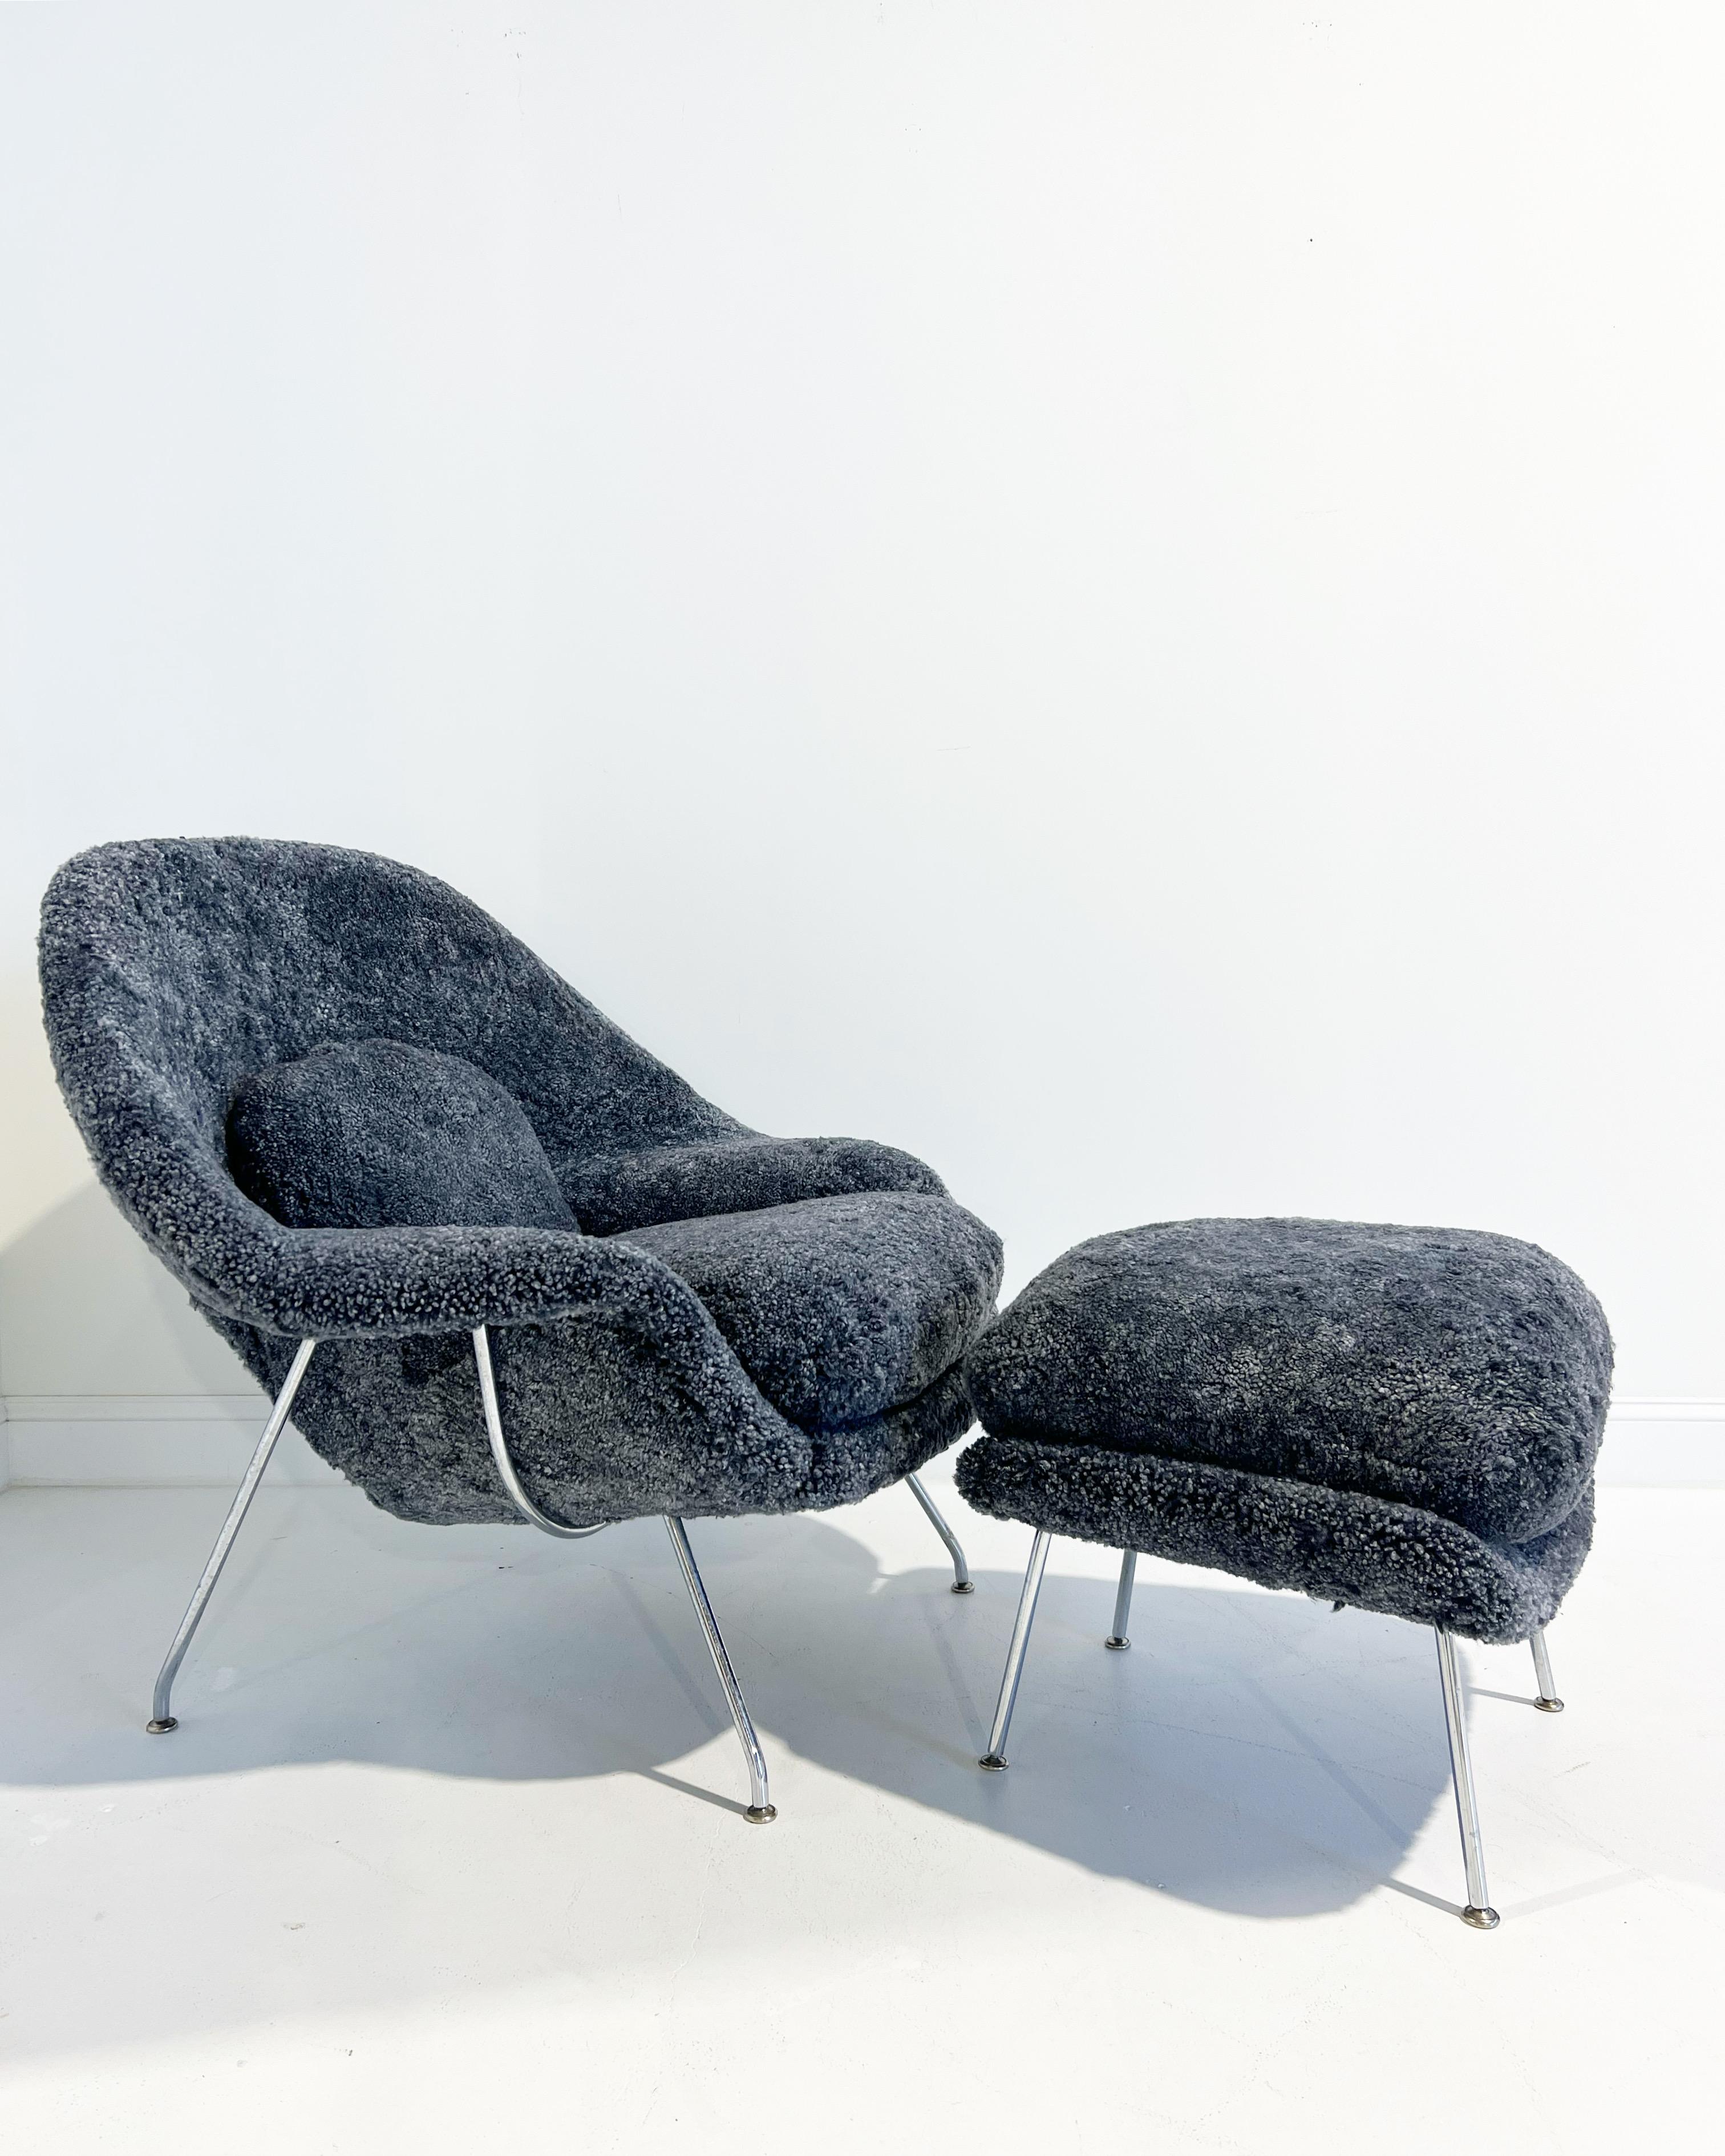 Forsyth Bespoke Eero Saarinen Womb Chair and Ottoman in Shearling For Sale 6